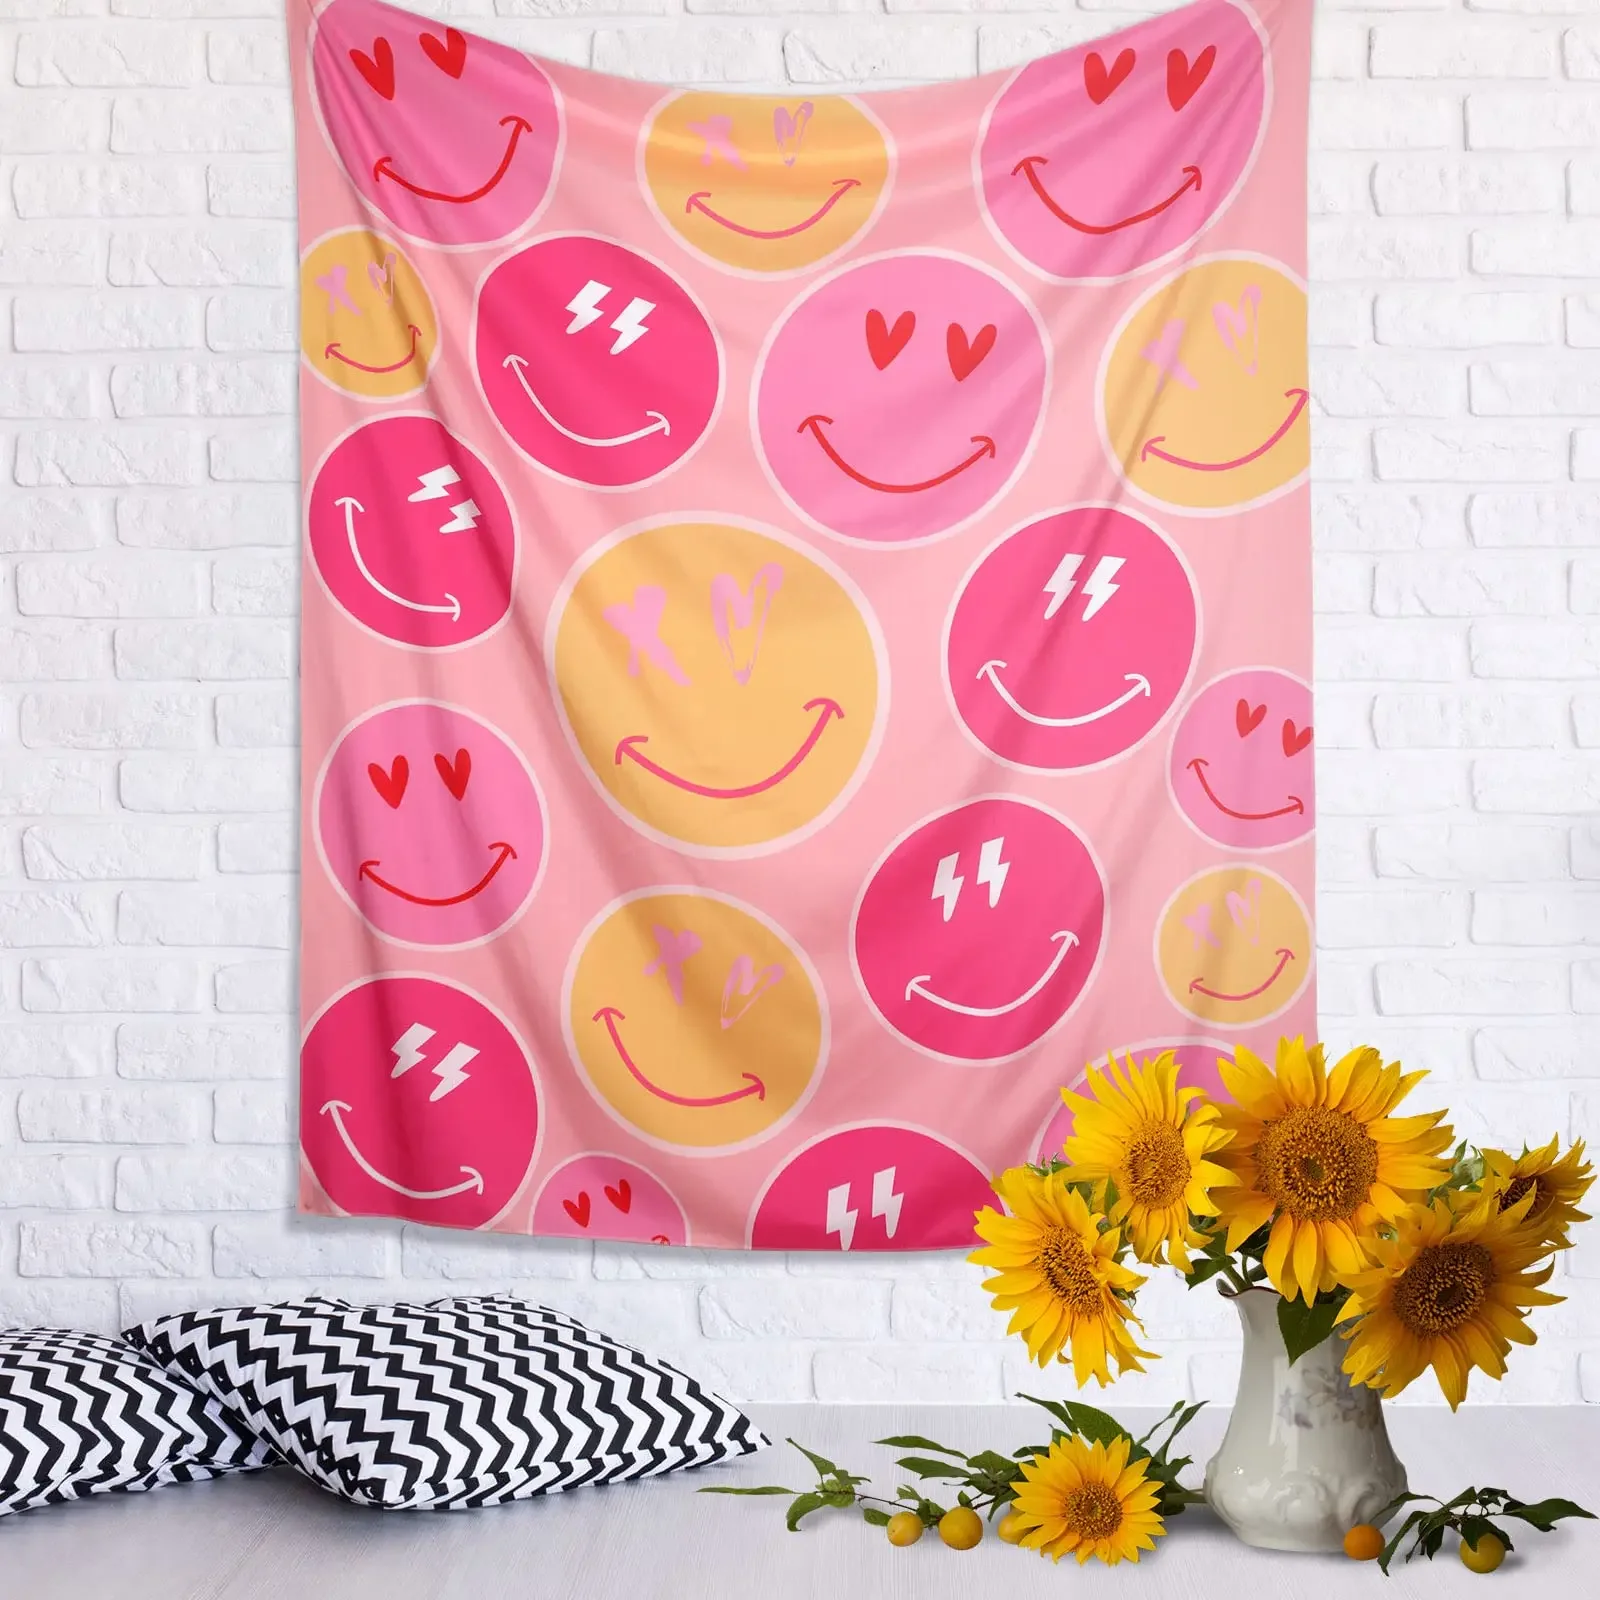 

Cute Smile Face Tapestry Preppy Room Decor Aesthetic Pink Fabric Wall Art for Teen Girls Bedroom Living Room College Dorm Decor